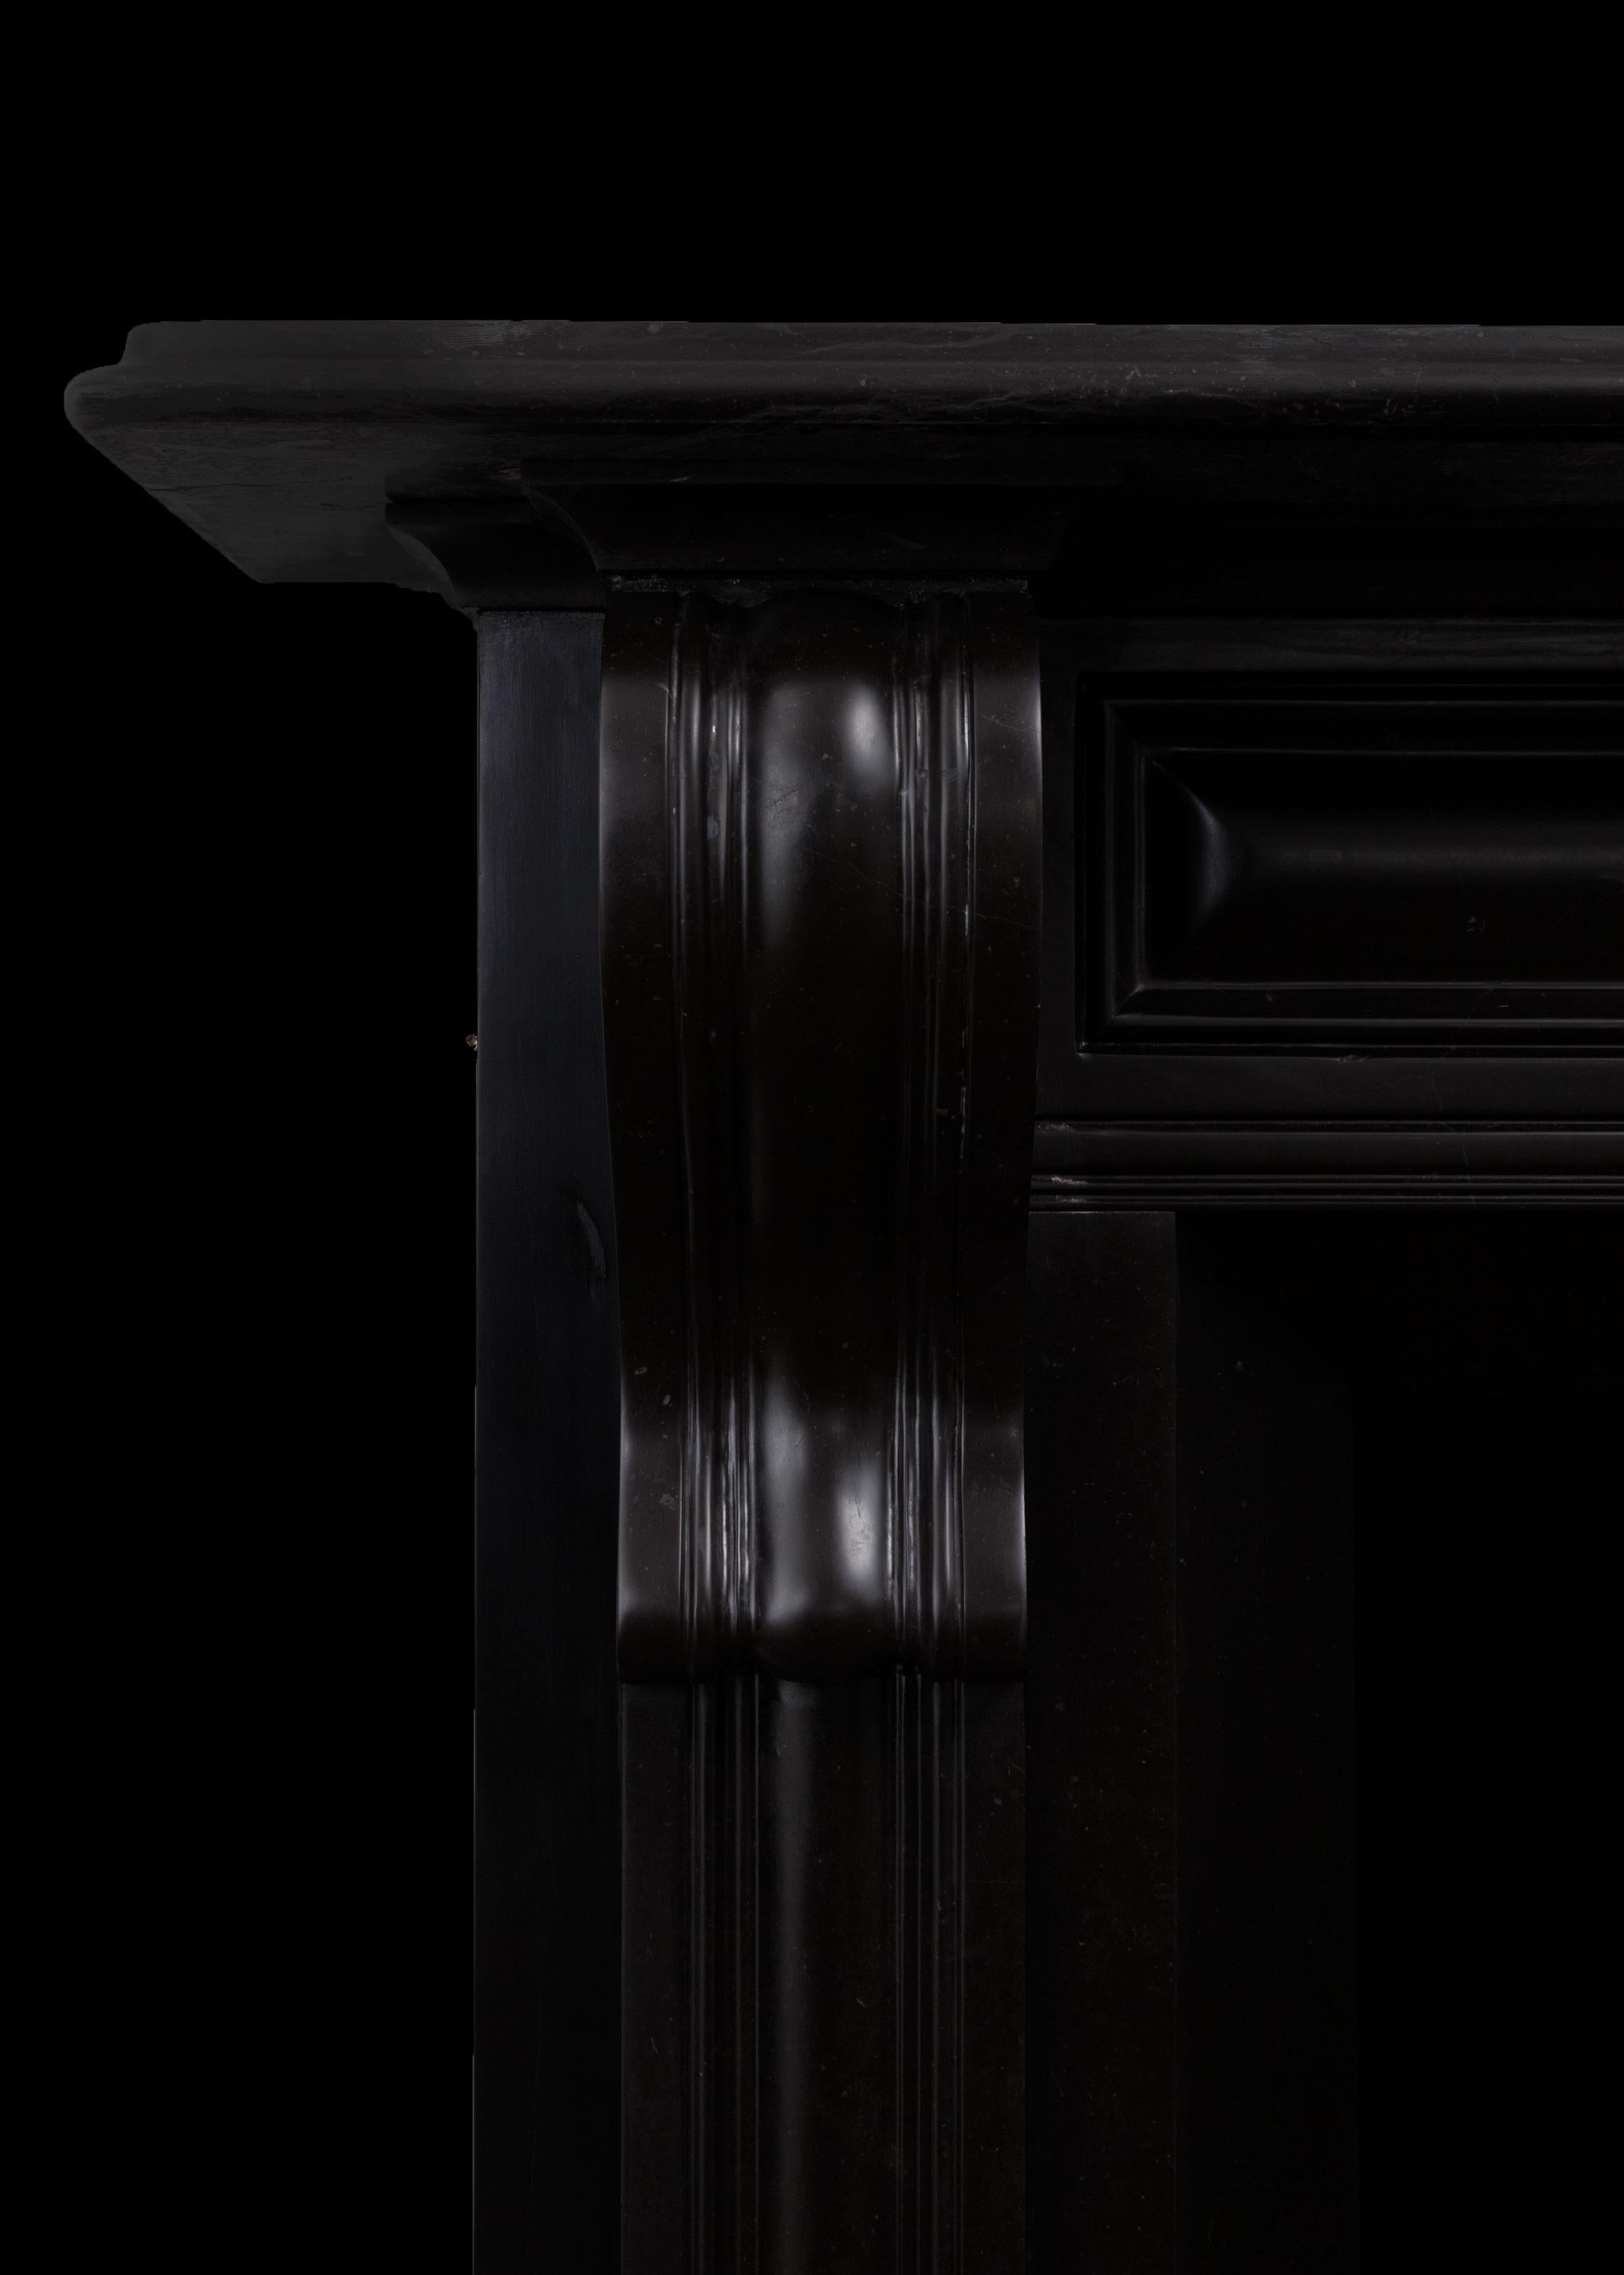 A black Kilkenny marble fireplace surround.
This fireplace is in the early 19th century Irish Regency style. It has cushion moulded panels running into corbels, tapering aperture and a deep moulded shelf. A design which was popular in Ireland